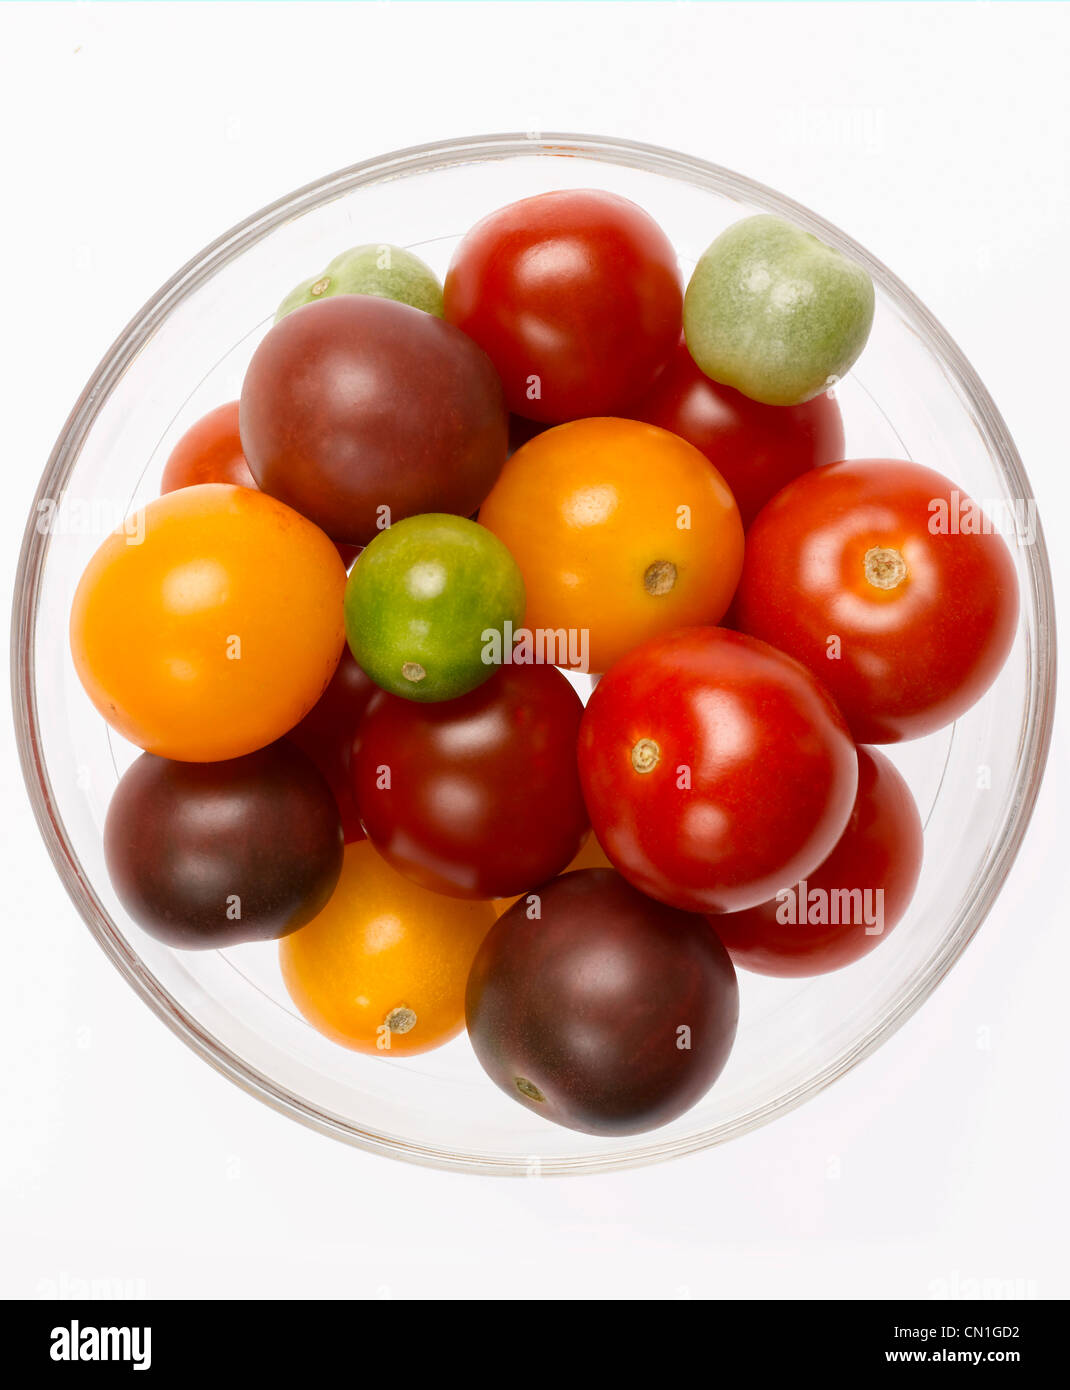 Bowl of Heirloom Cherry Tomatoes from Above Stock Photo